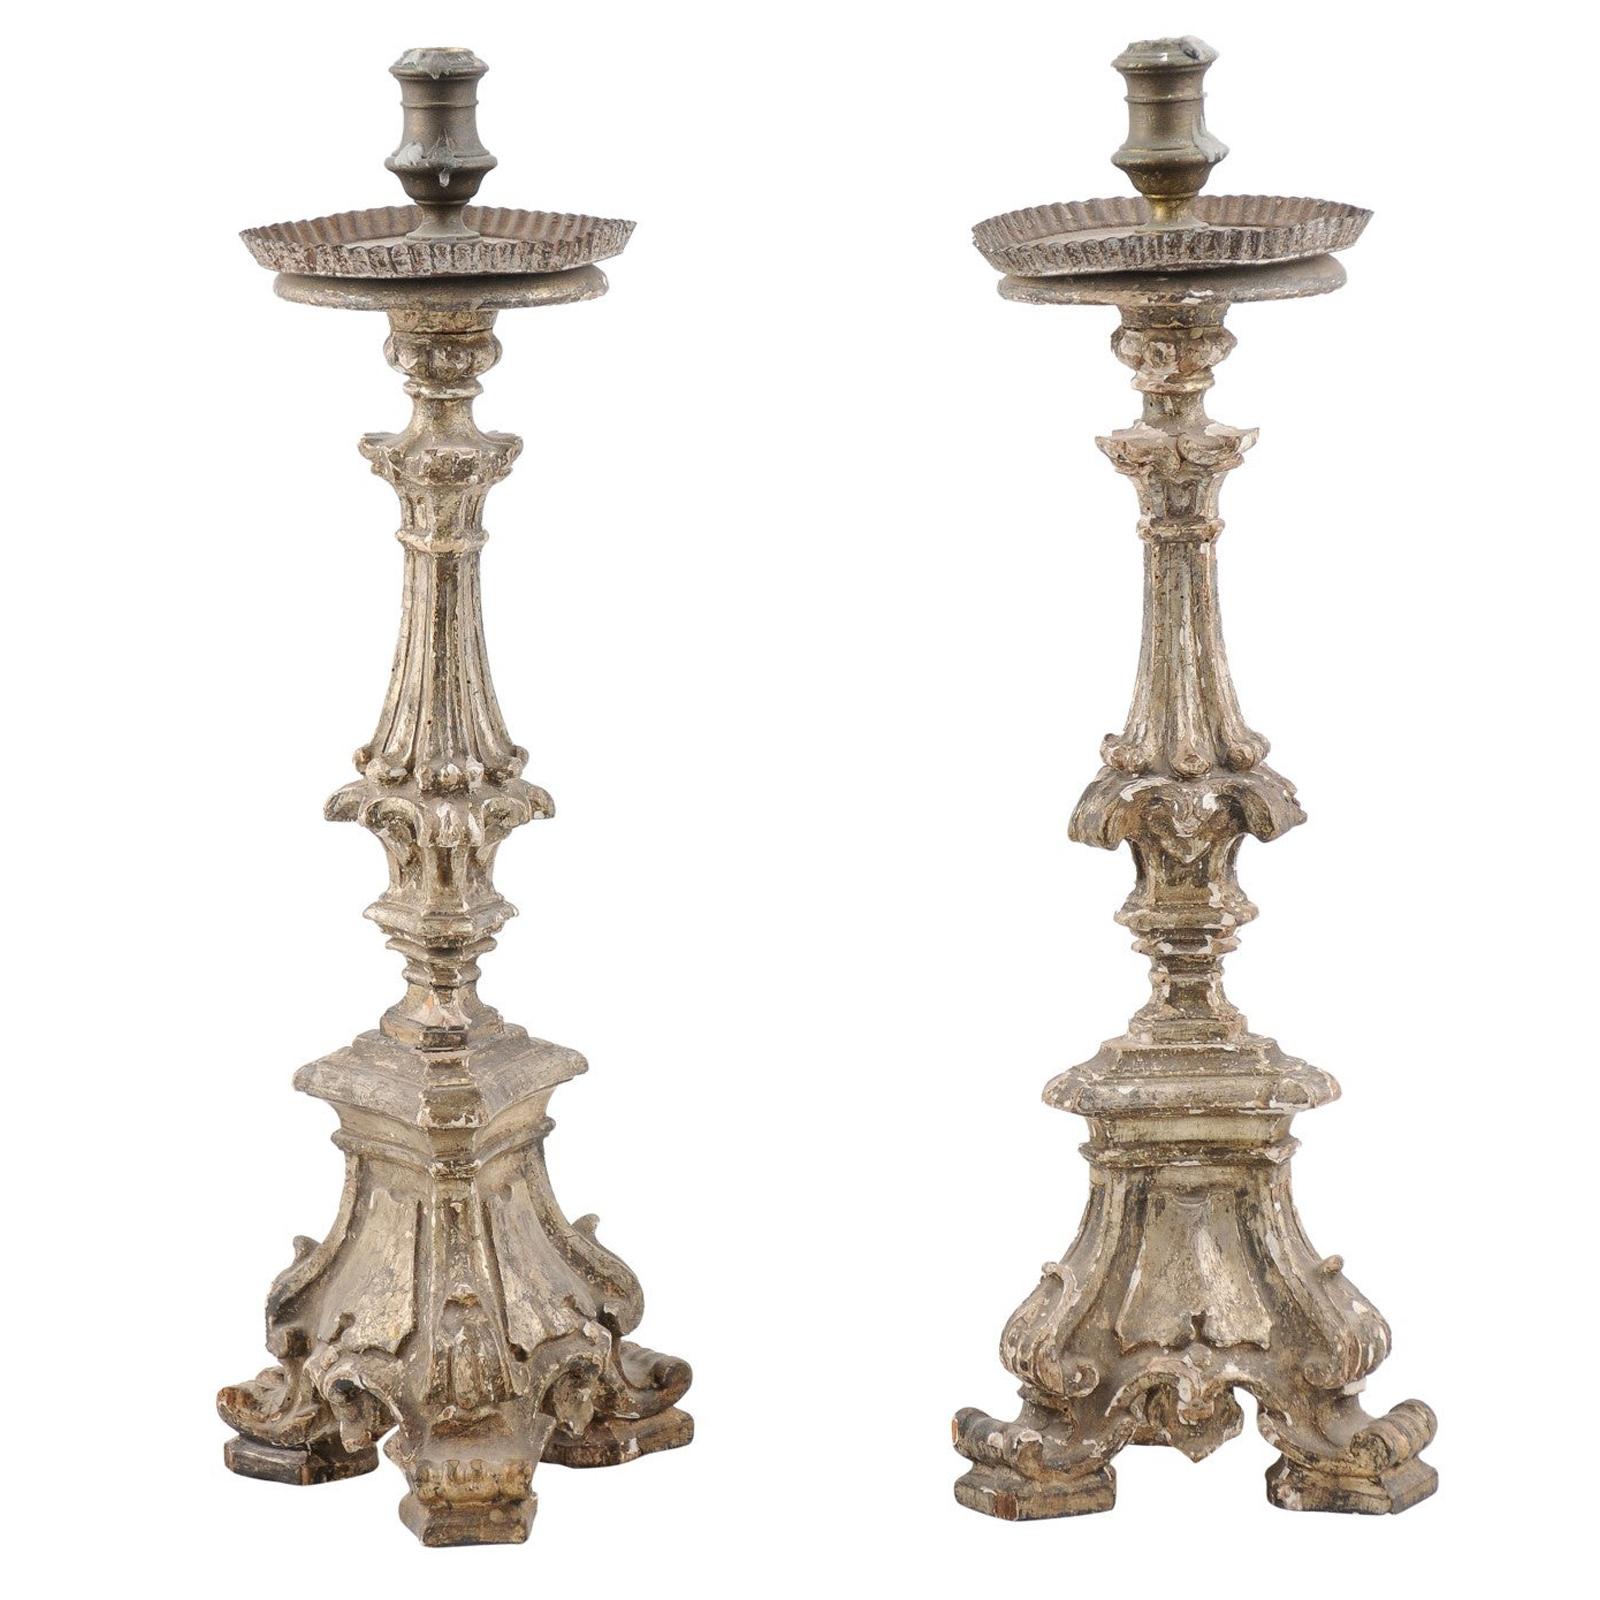 Pair of Rococo Period 18th Century Italian Painted and Carved Candlesticks For Sale